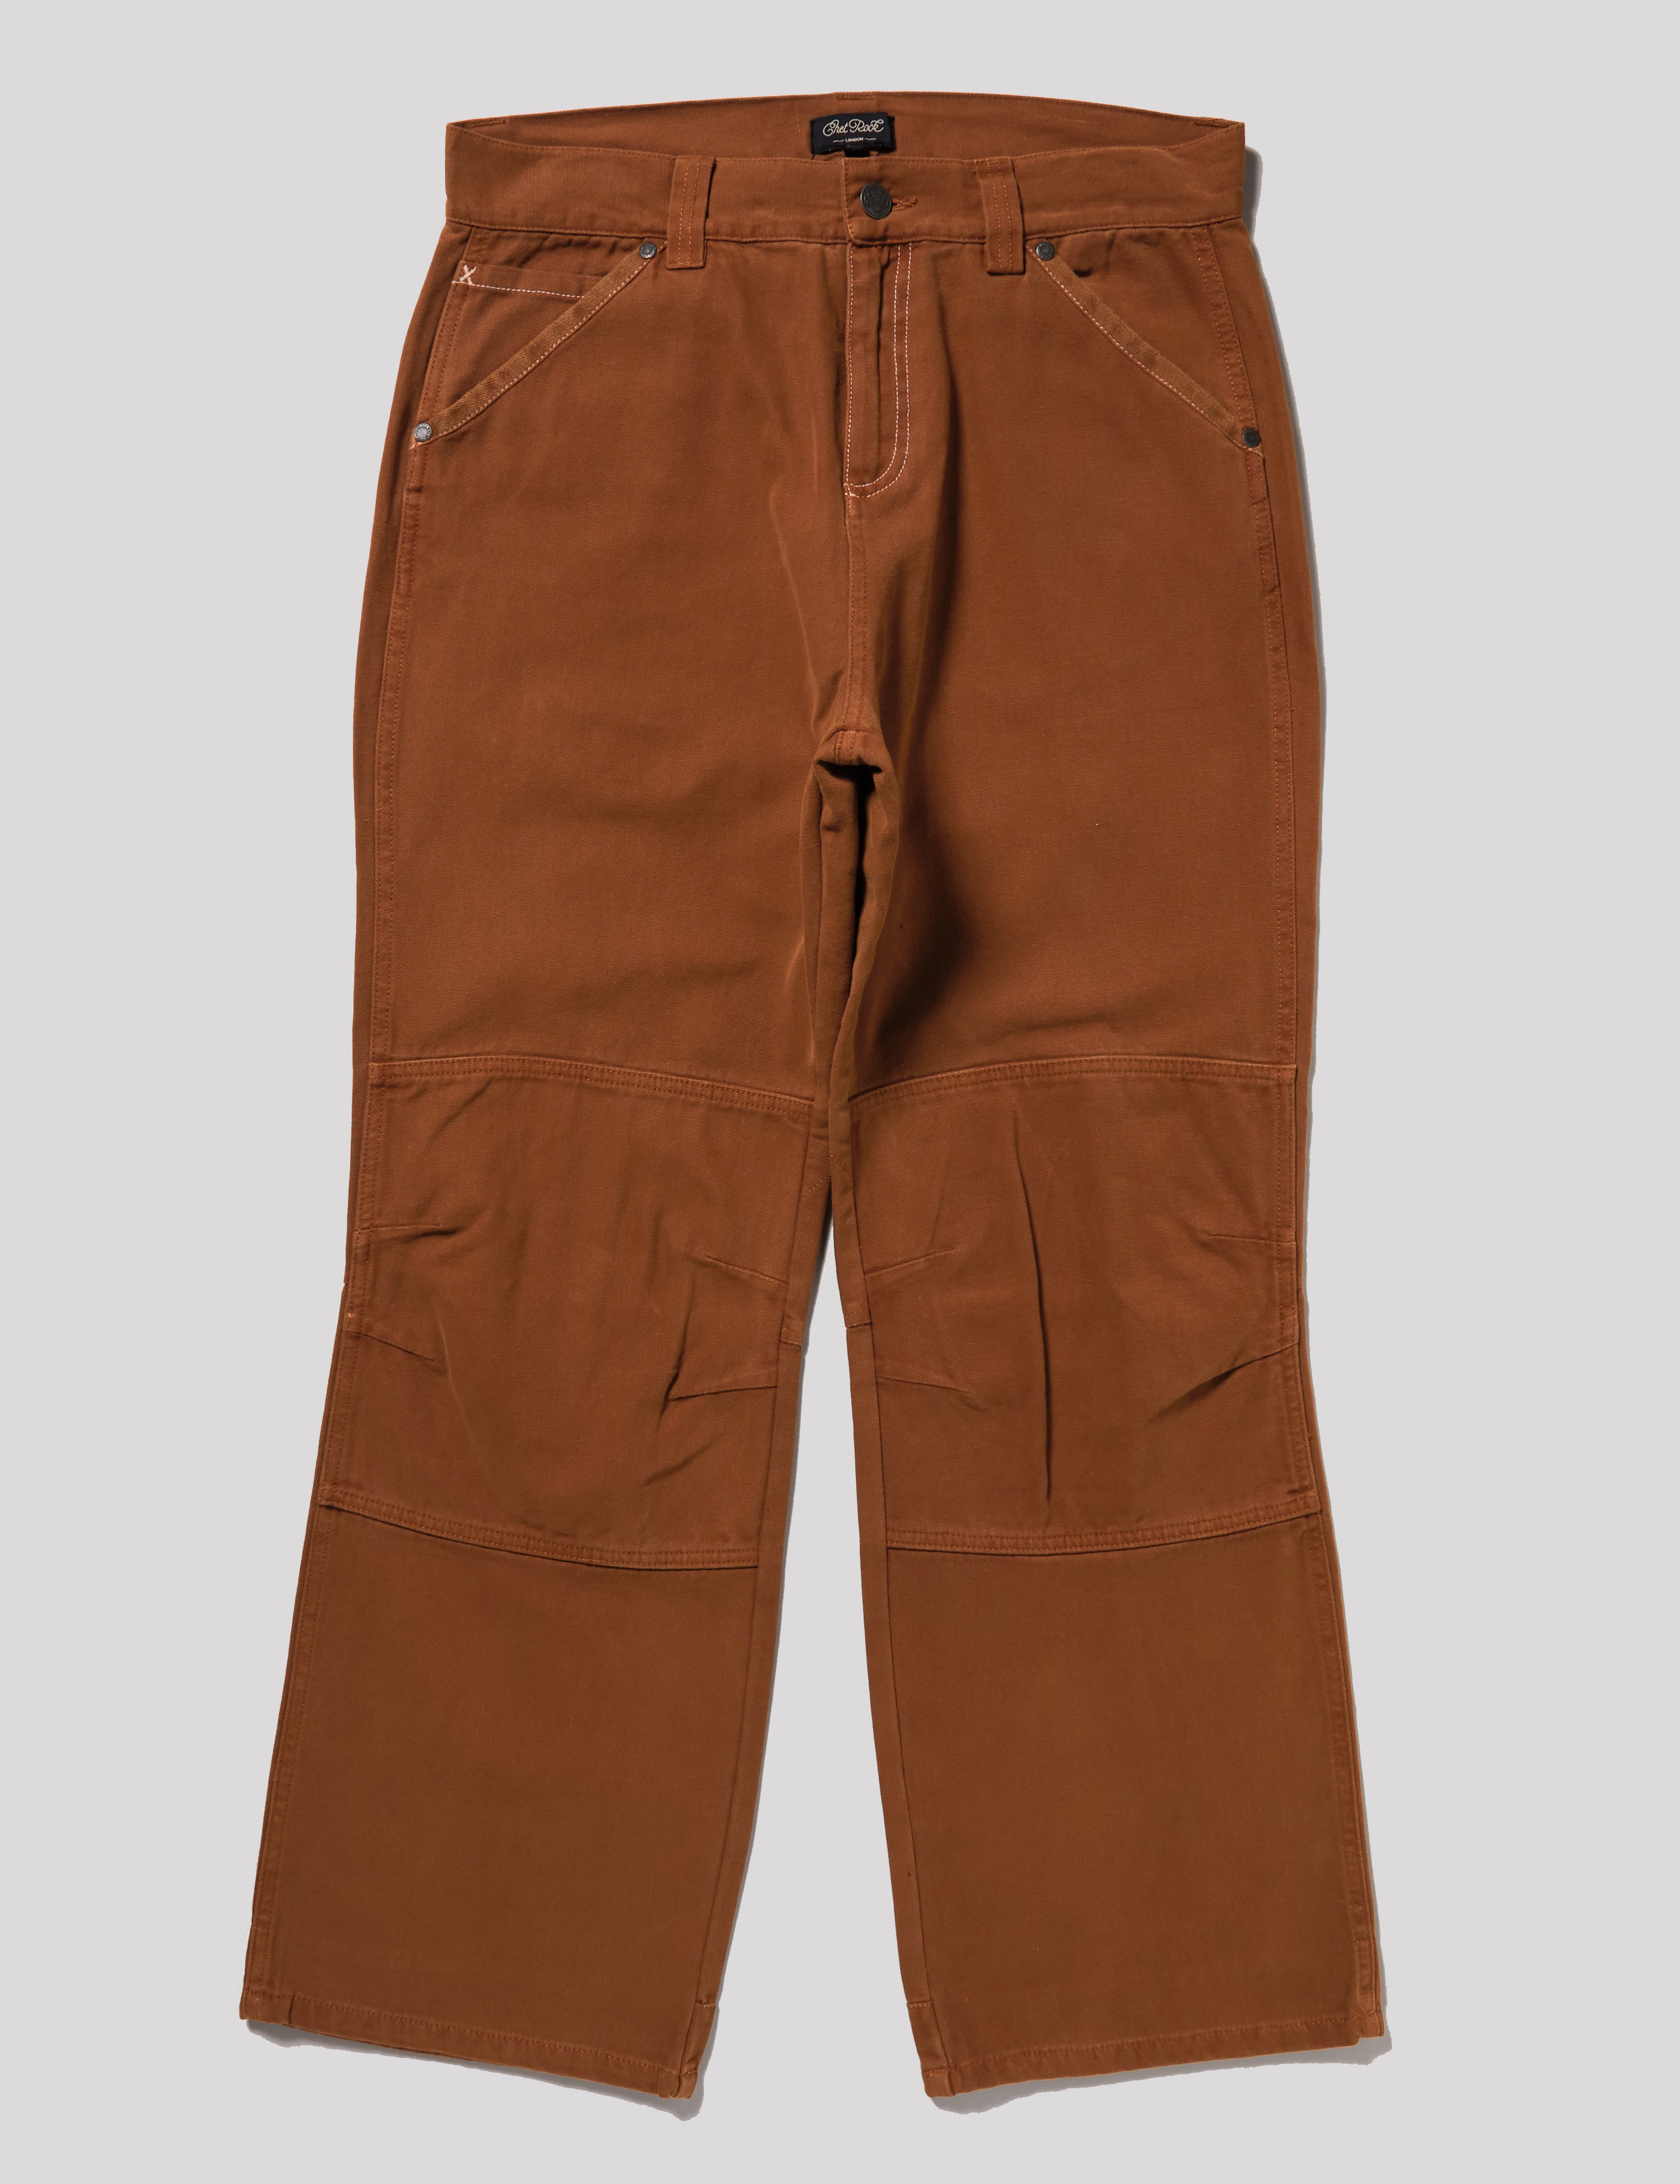 Carhartt 104296 Stretch Twill Double Front Trousers | MI Supplies